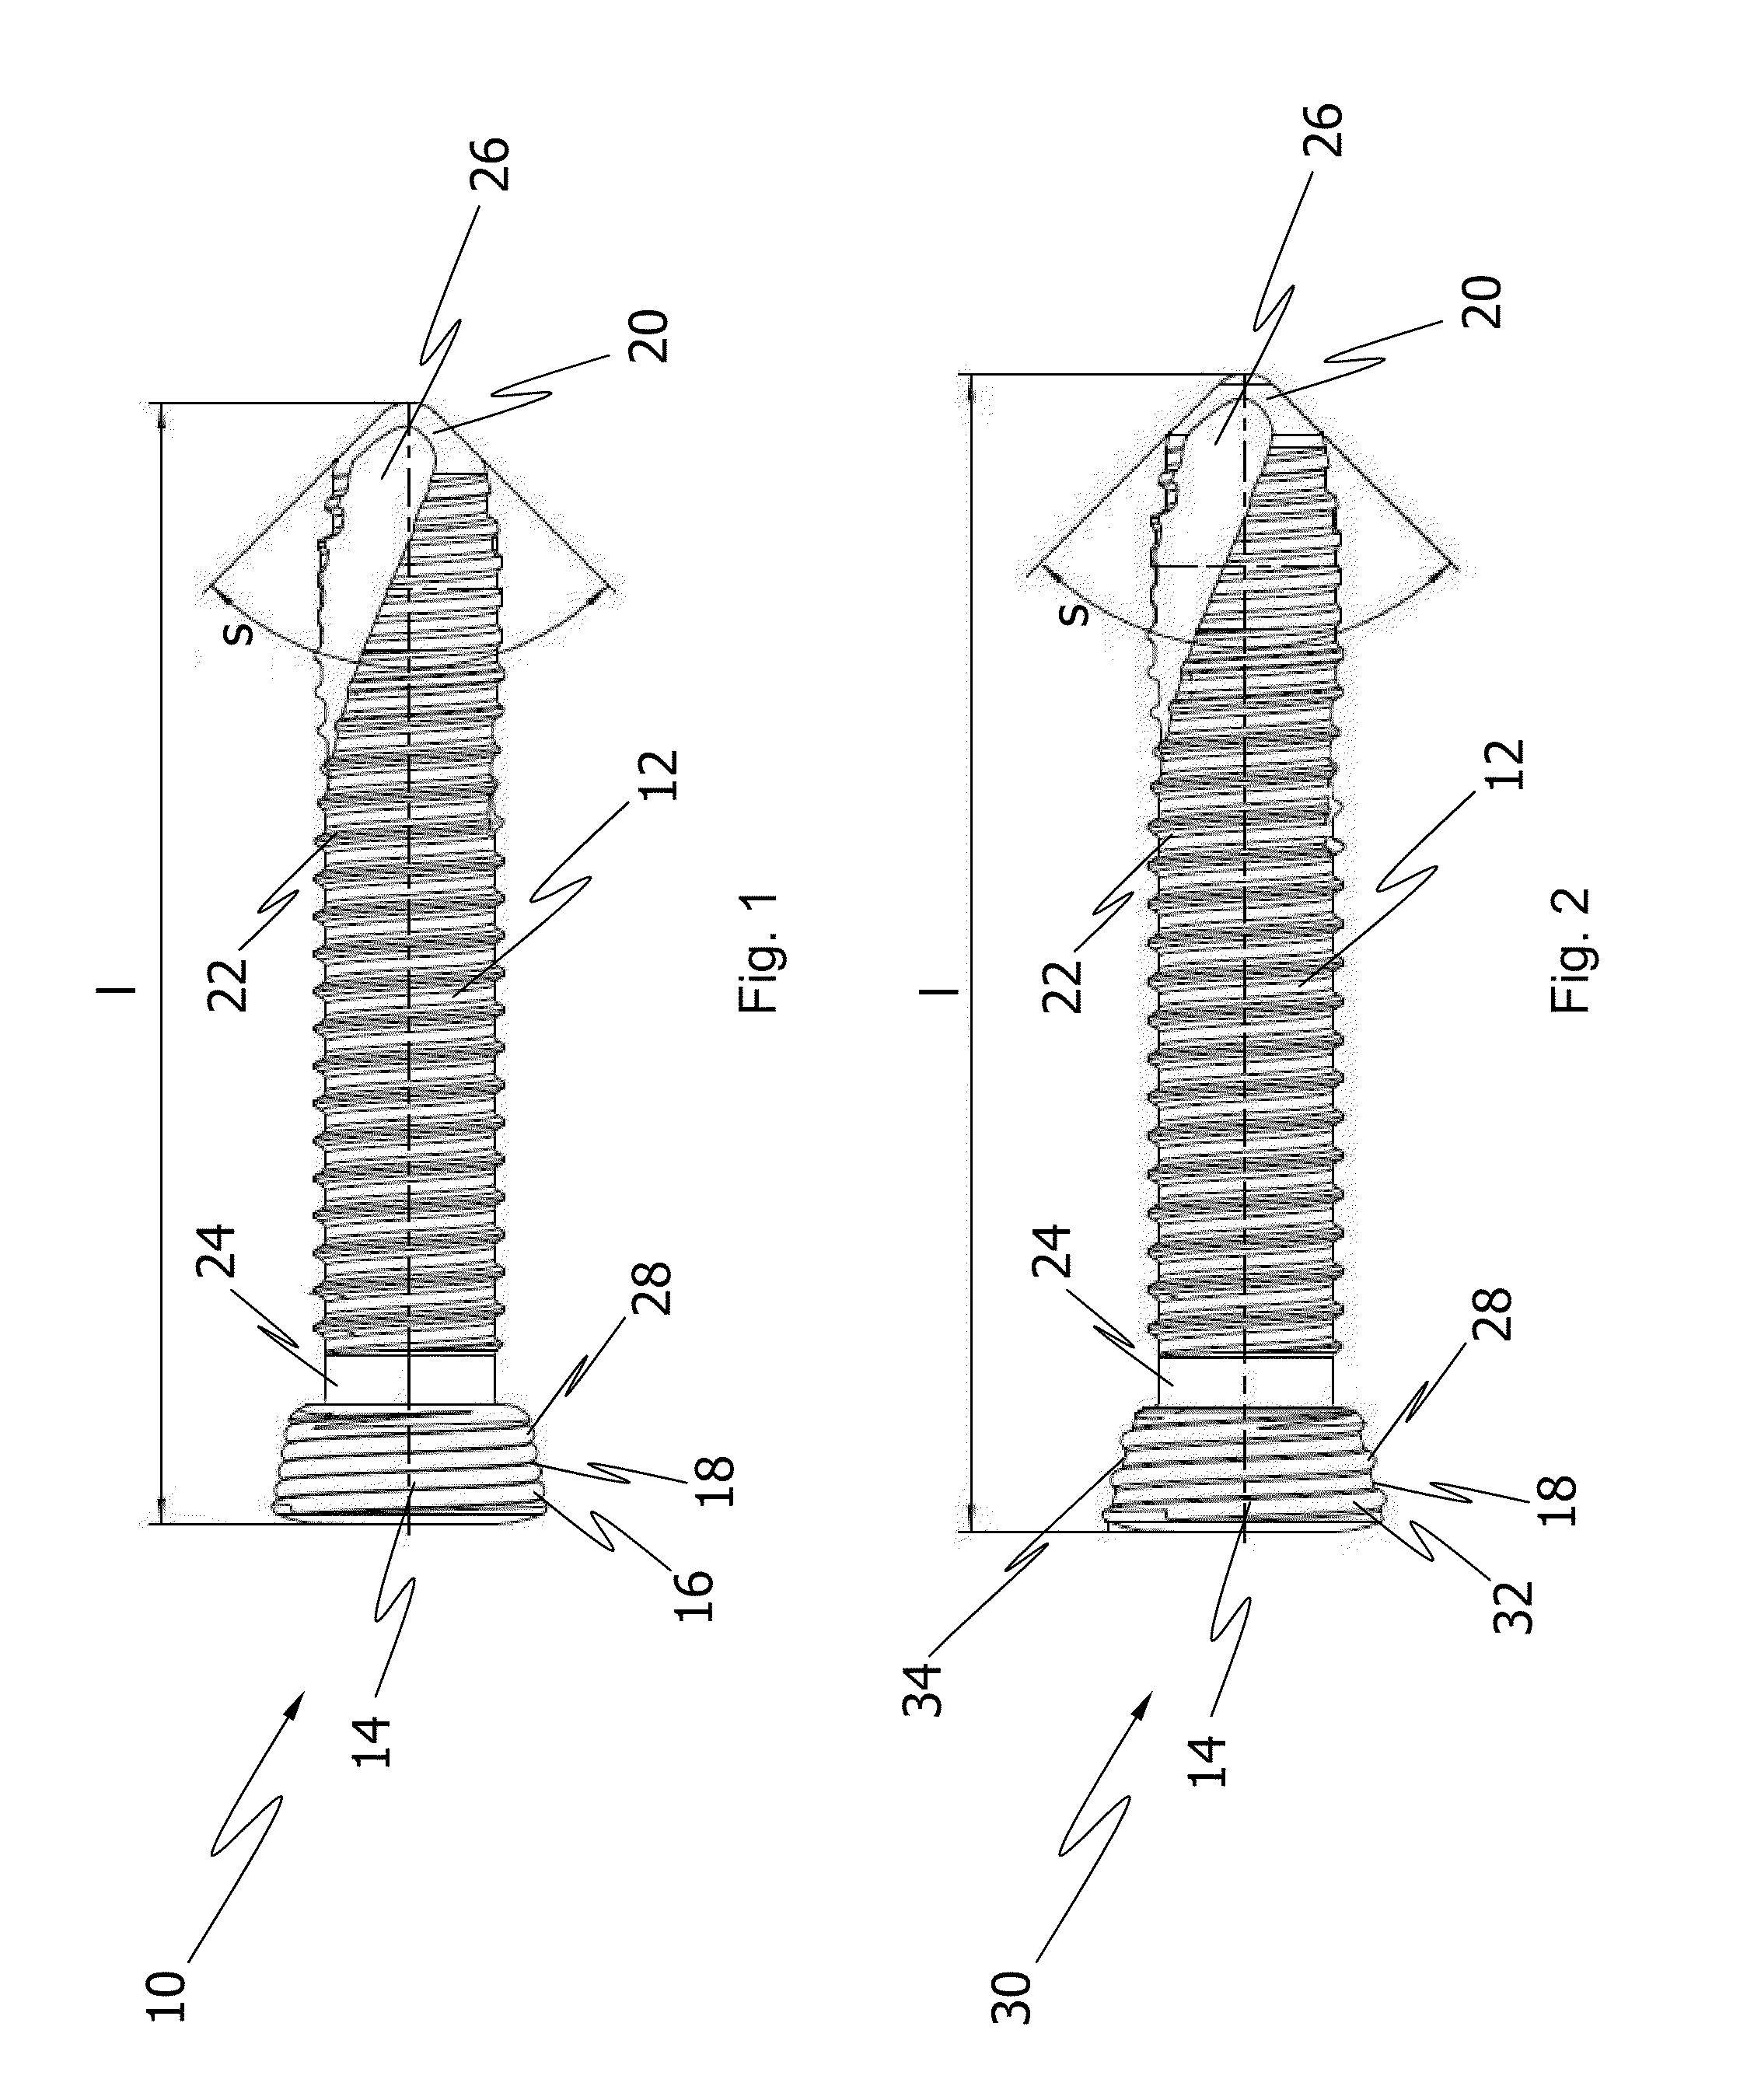 Bone fixation system with curved profile threads